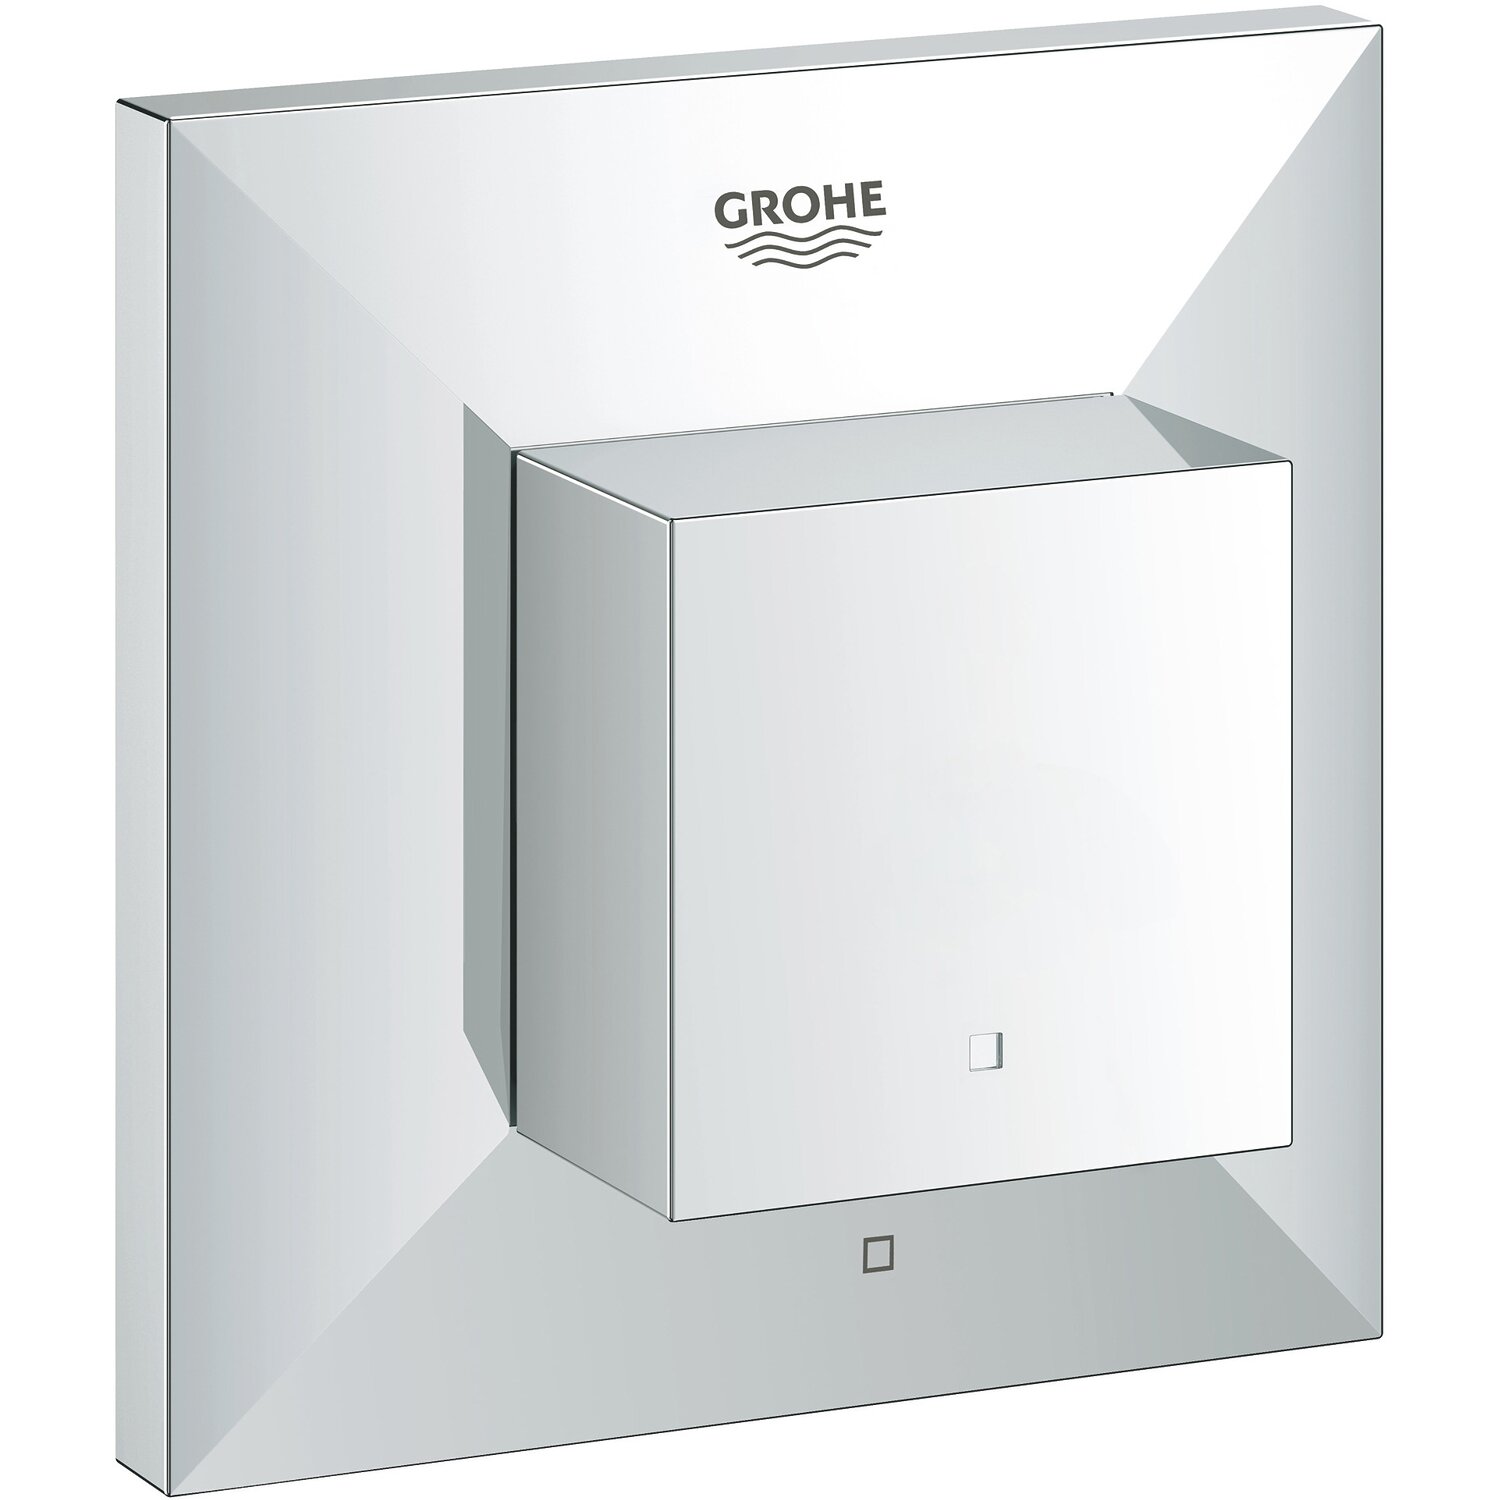 PoliHome Εξωτερικό μέρος διακόπτη Grohe Allure Brilliant